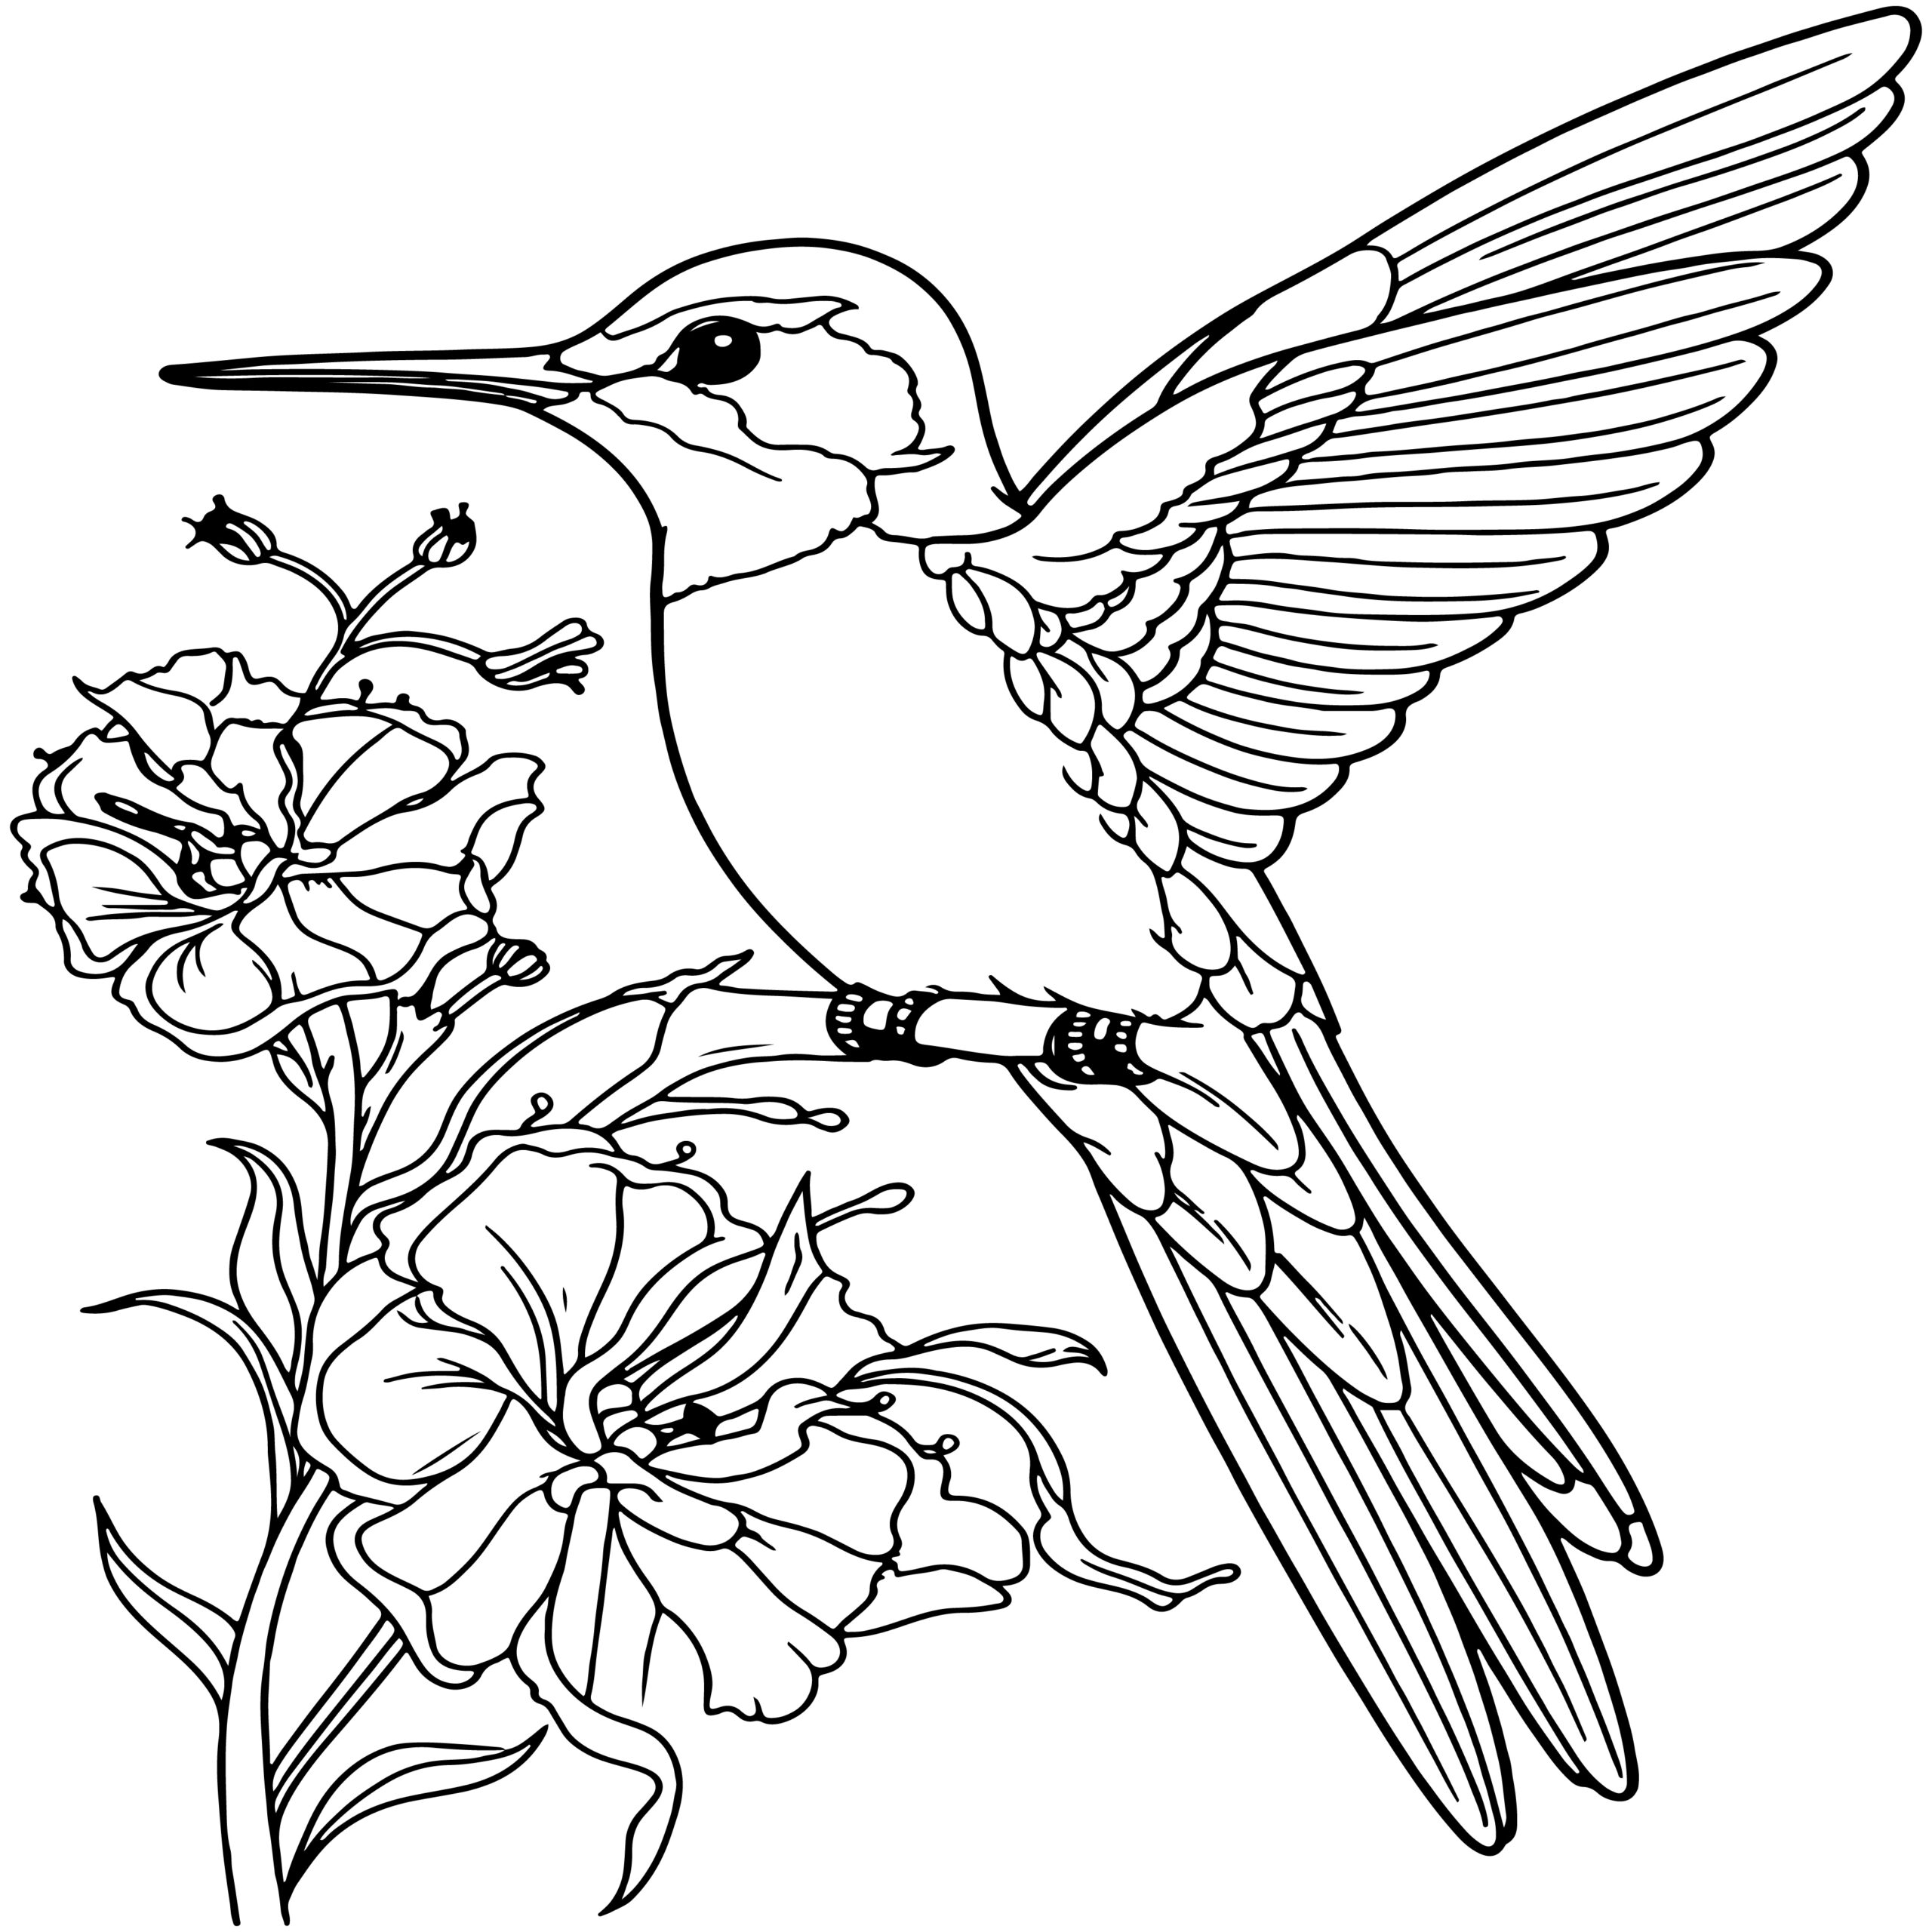 Hummingbird coloring book hummingbird coloring pages made by teachers